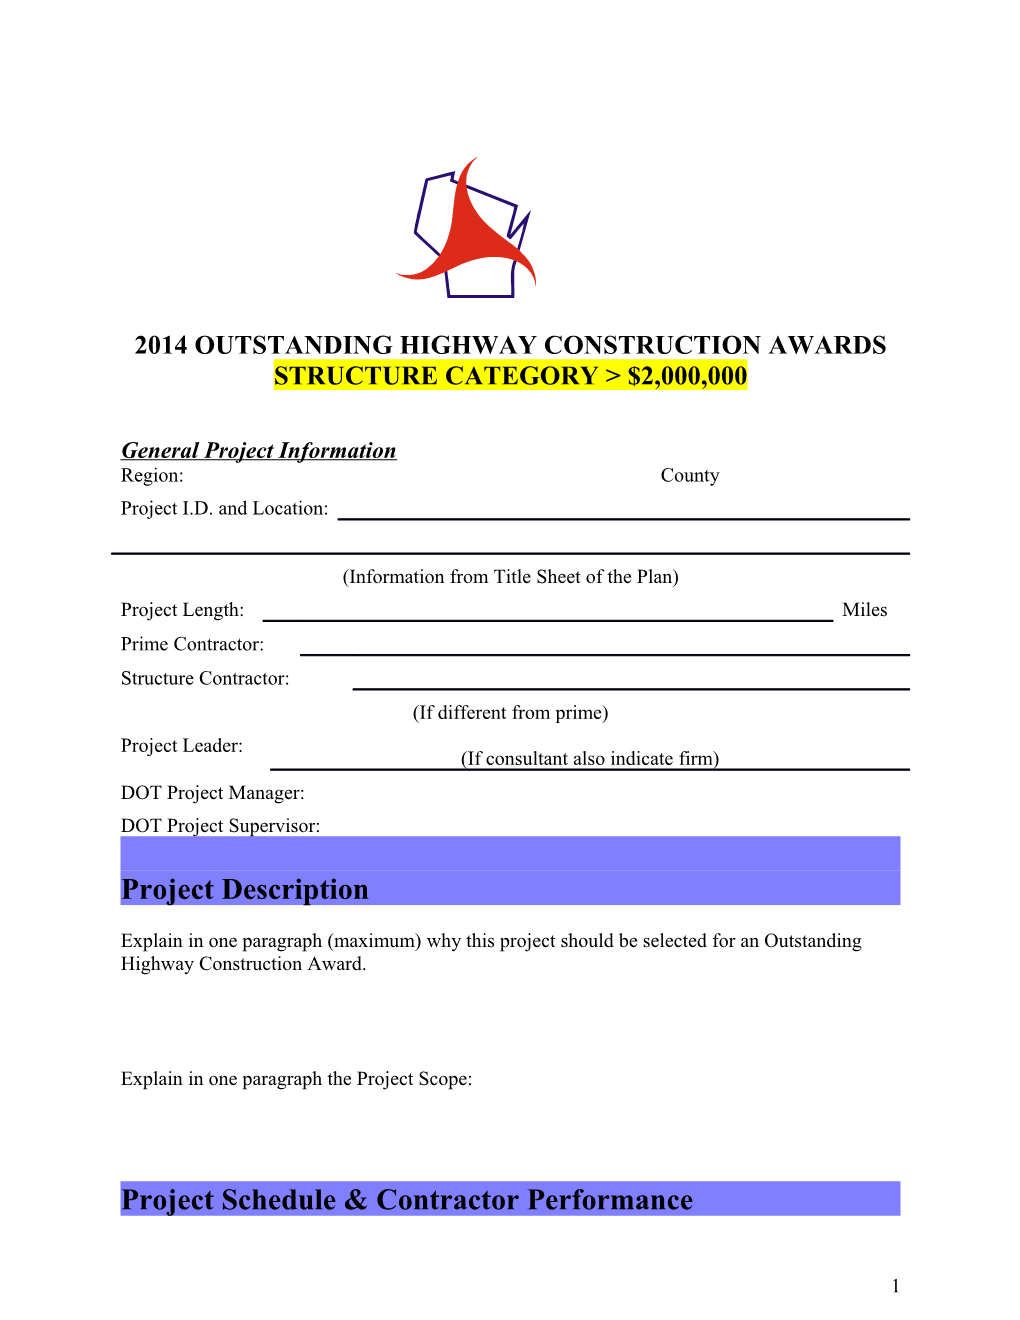 DTSD - 2014 Outstanding Highway Construction Large Structure Nomination Form